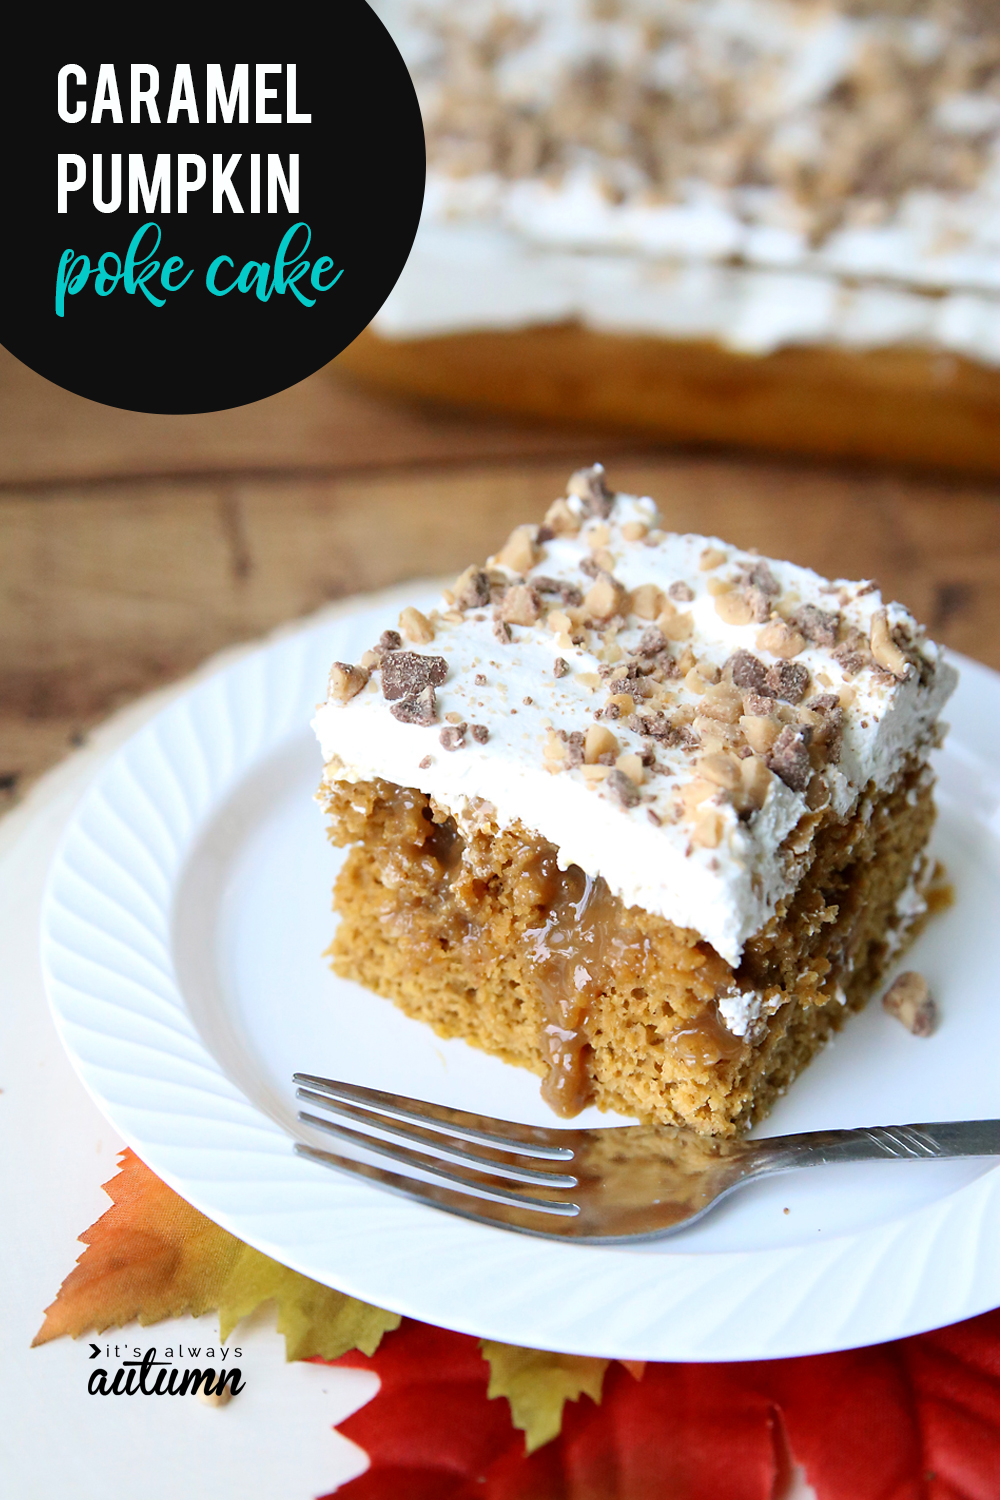 This caramel pumpkin poke cake recipe is everything you've always wanted in a fall dessert! Plus it's fast and easy to make.